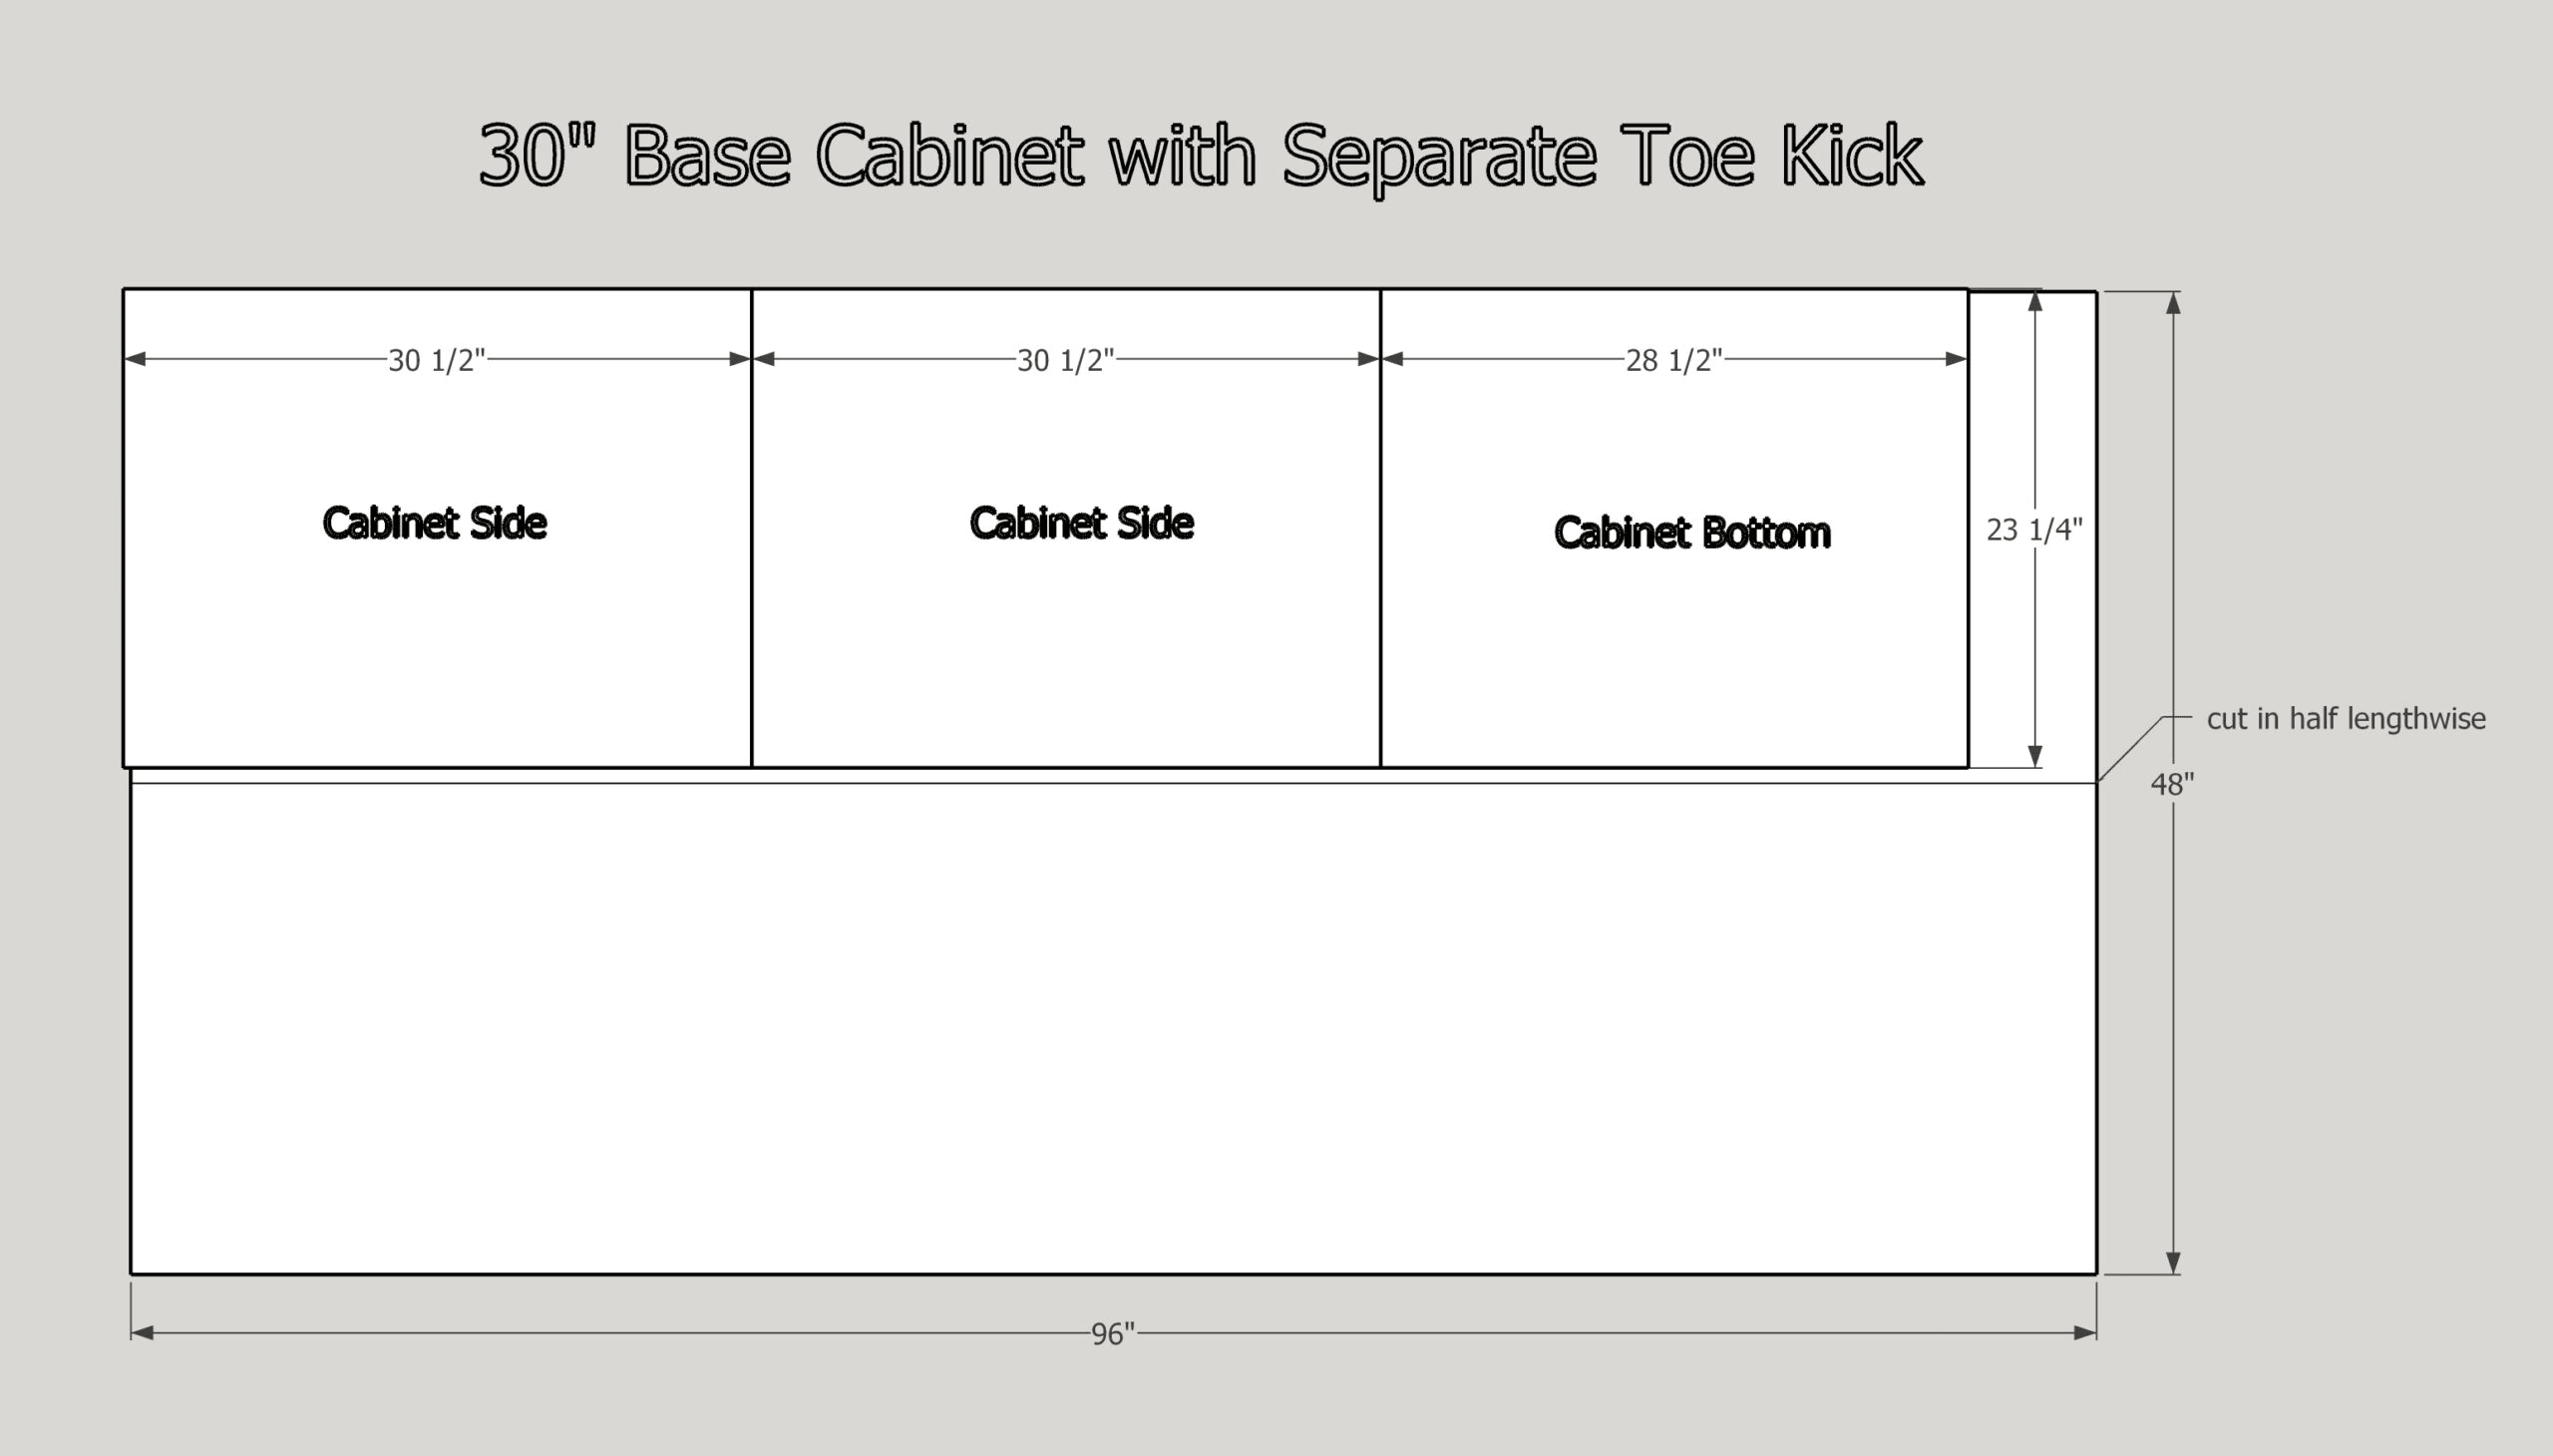 plywood cut diagram for 30" base cabinet with separate toe kick